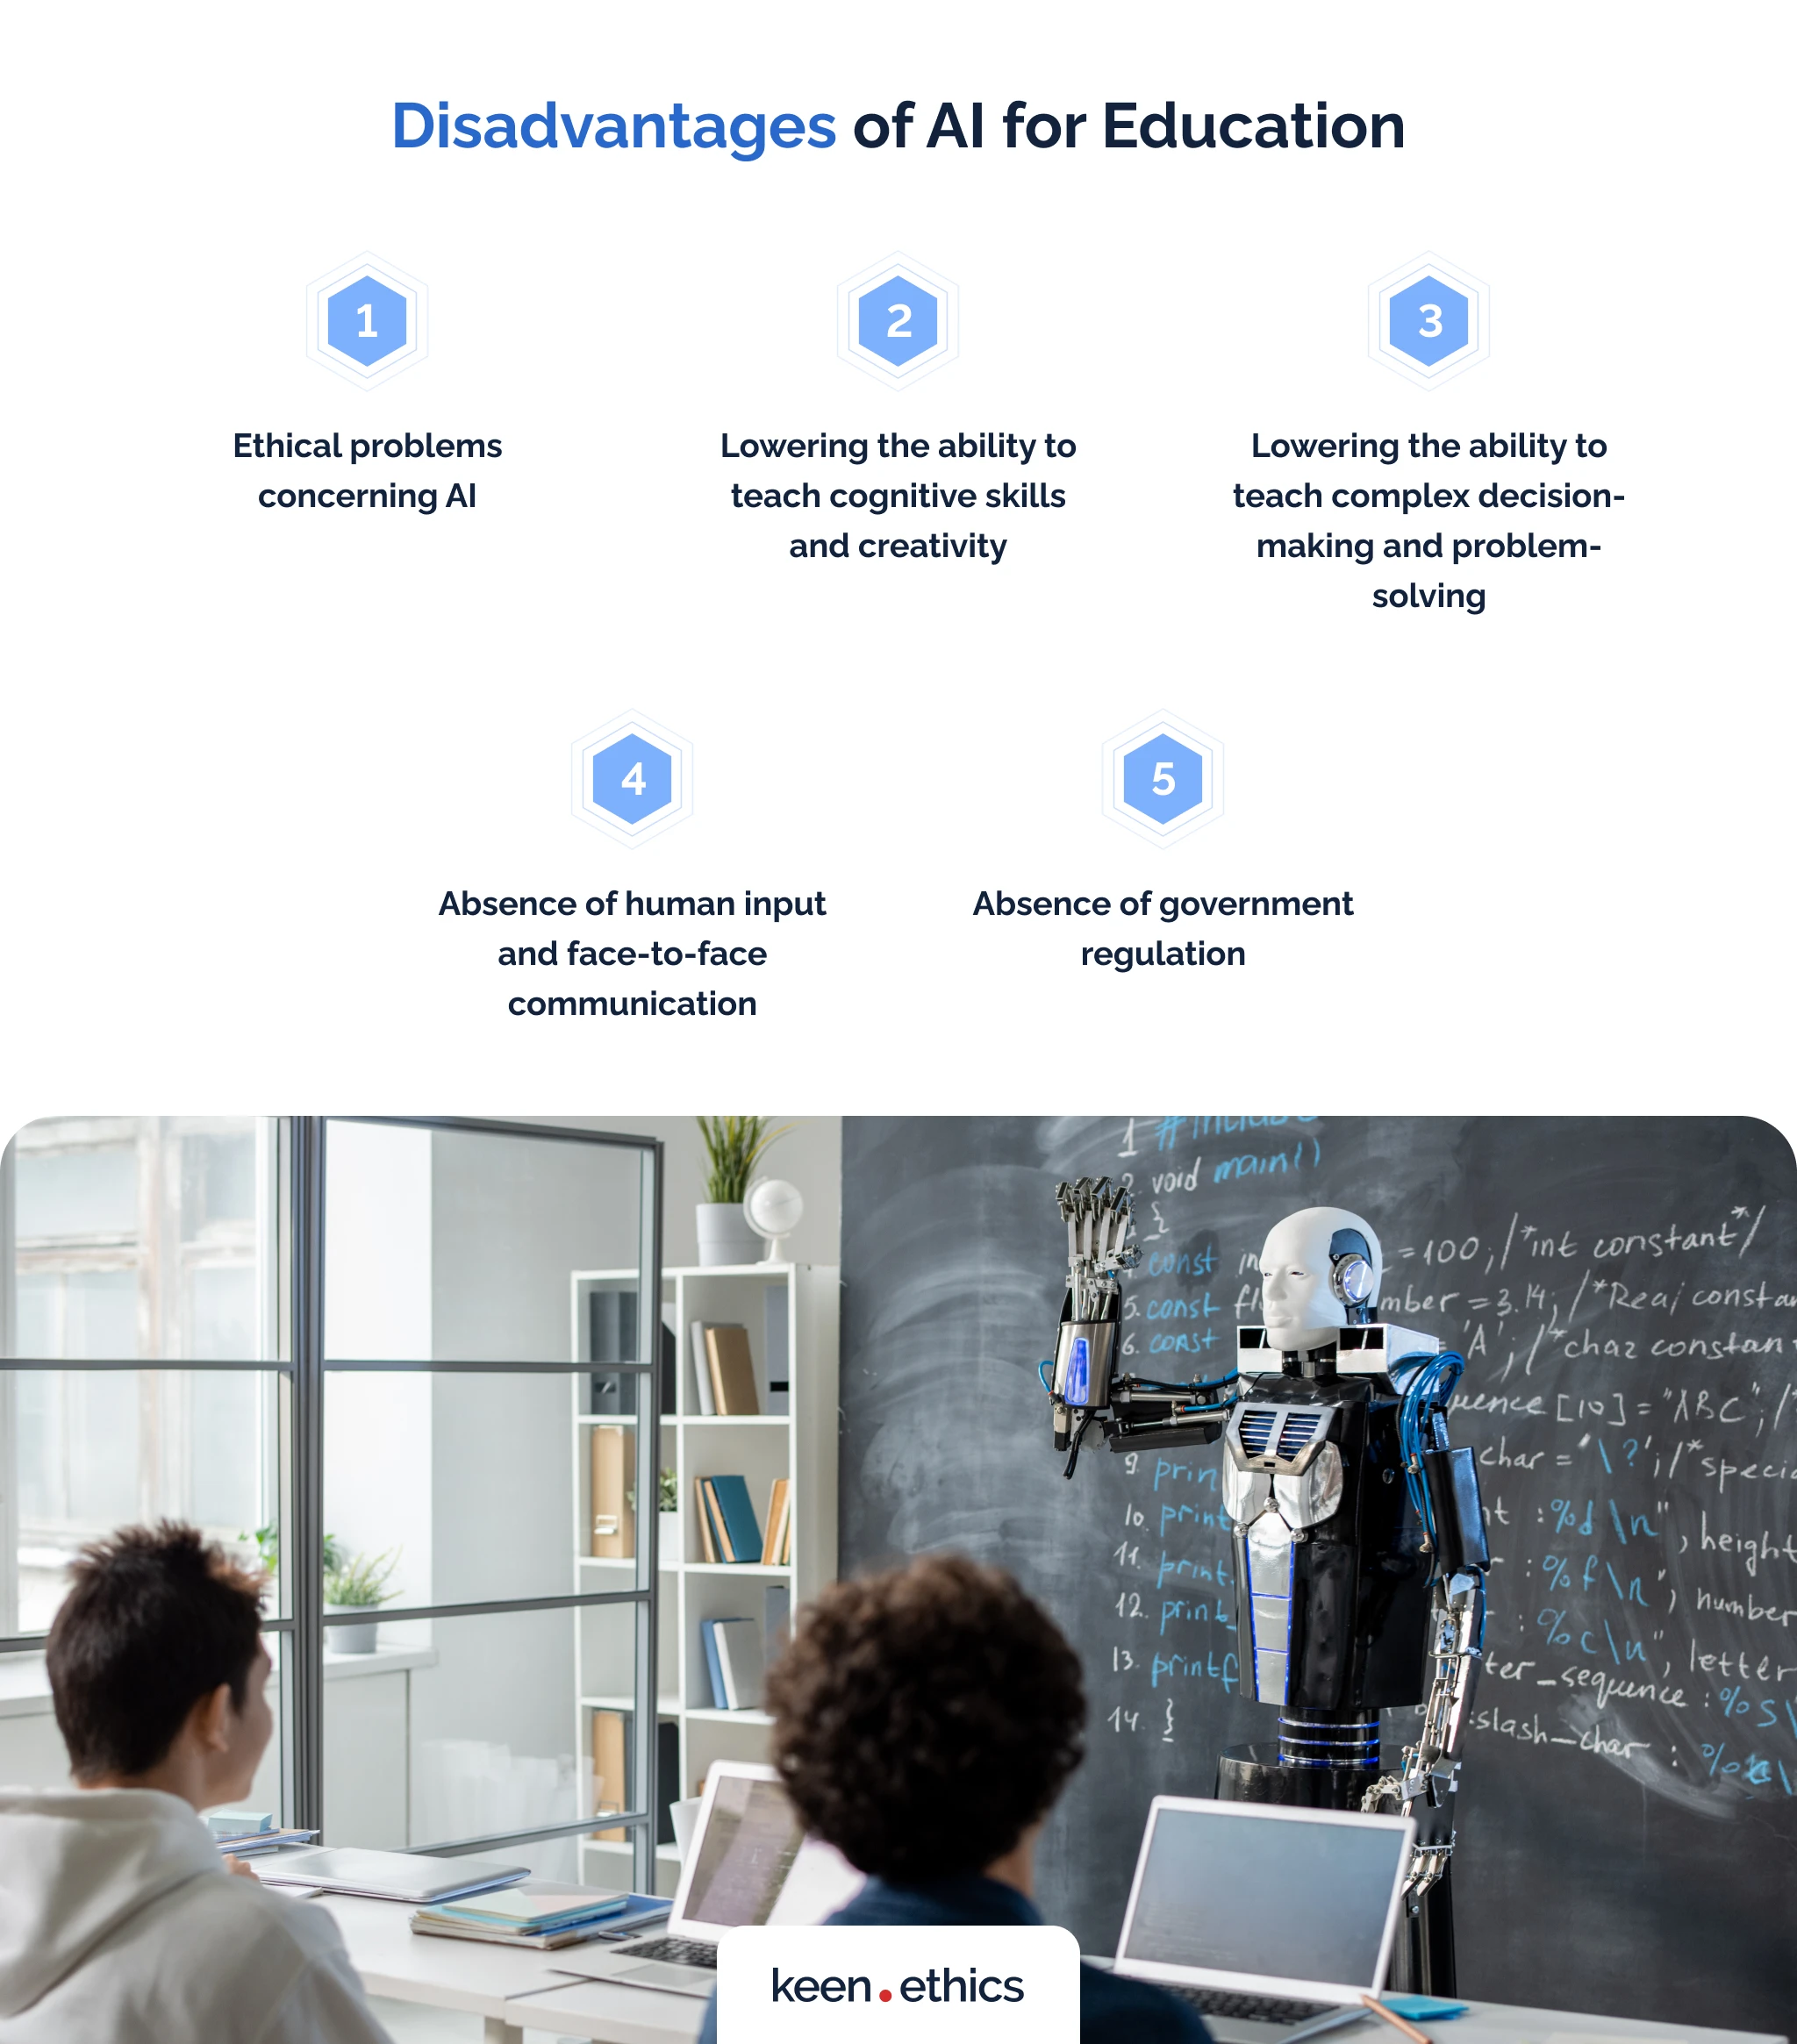 Disadvantages of AI for education